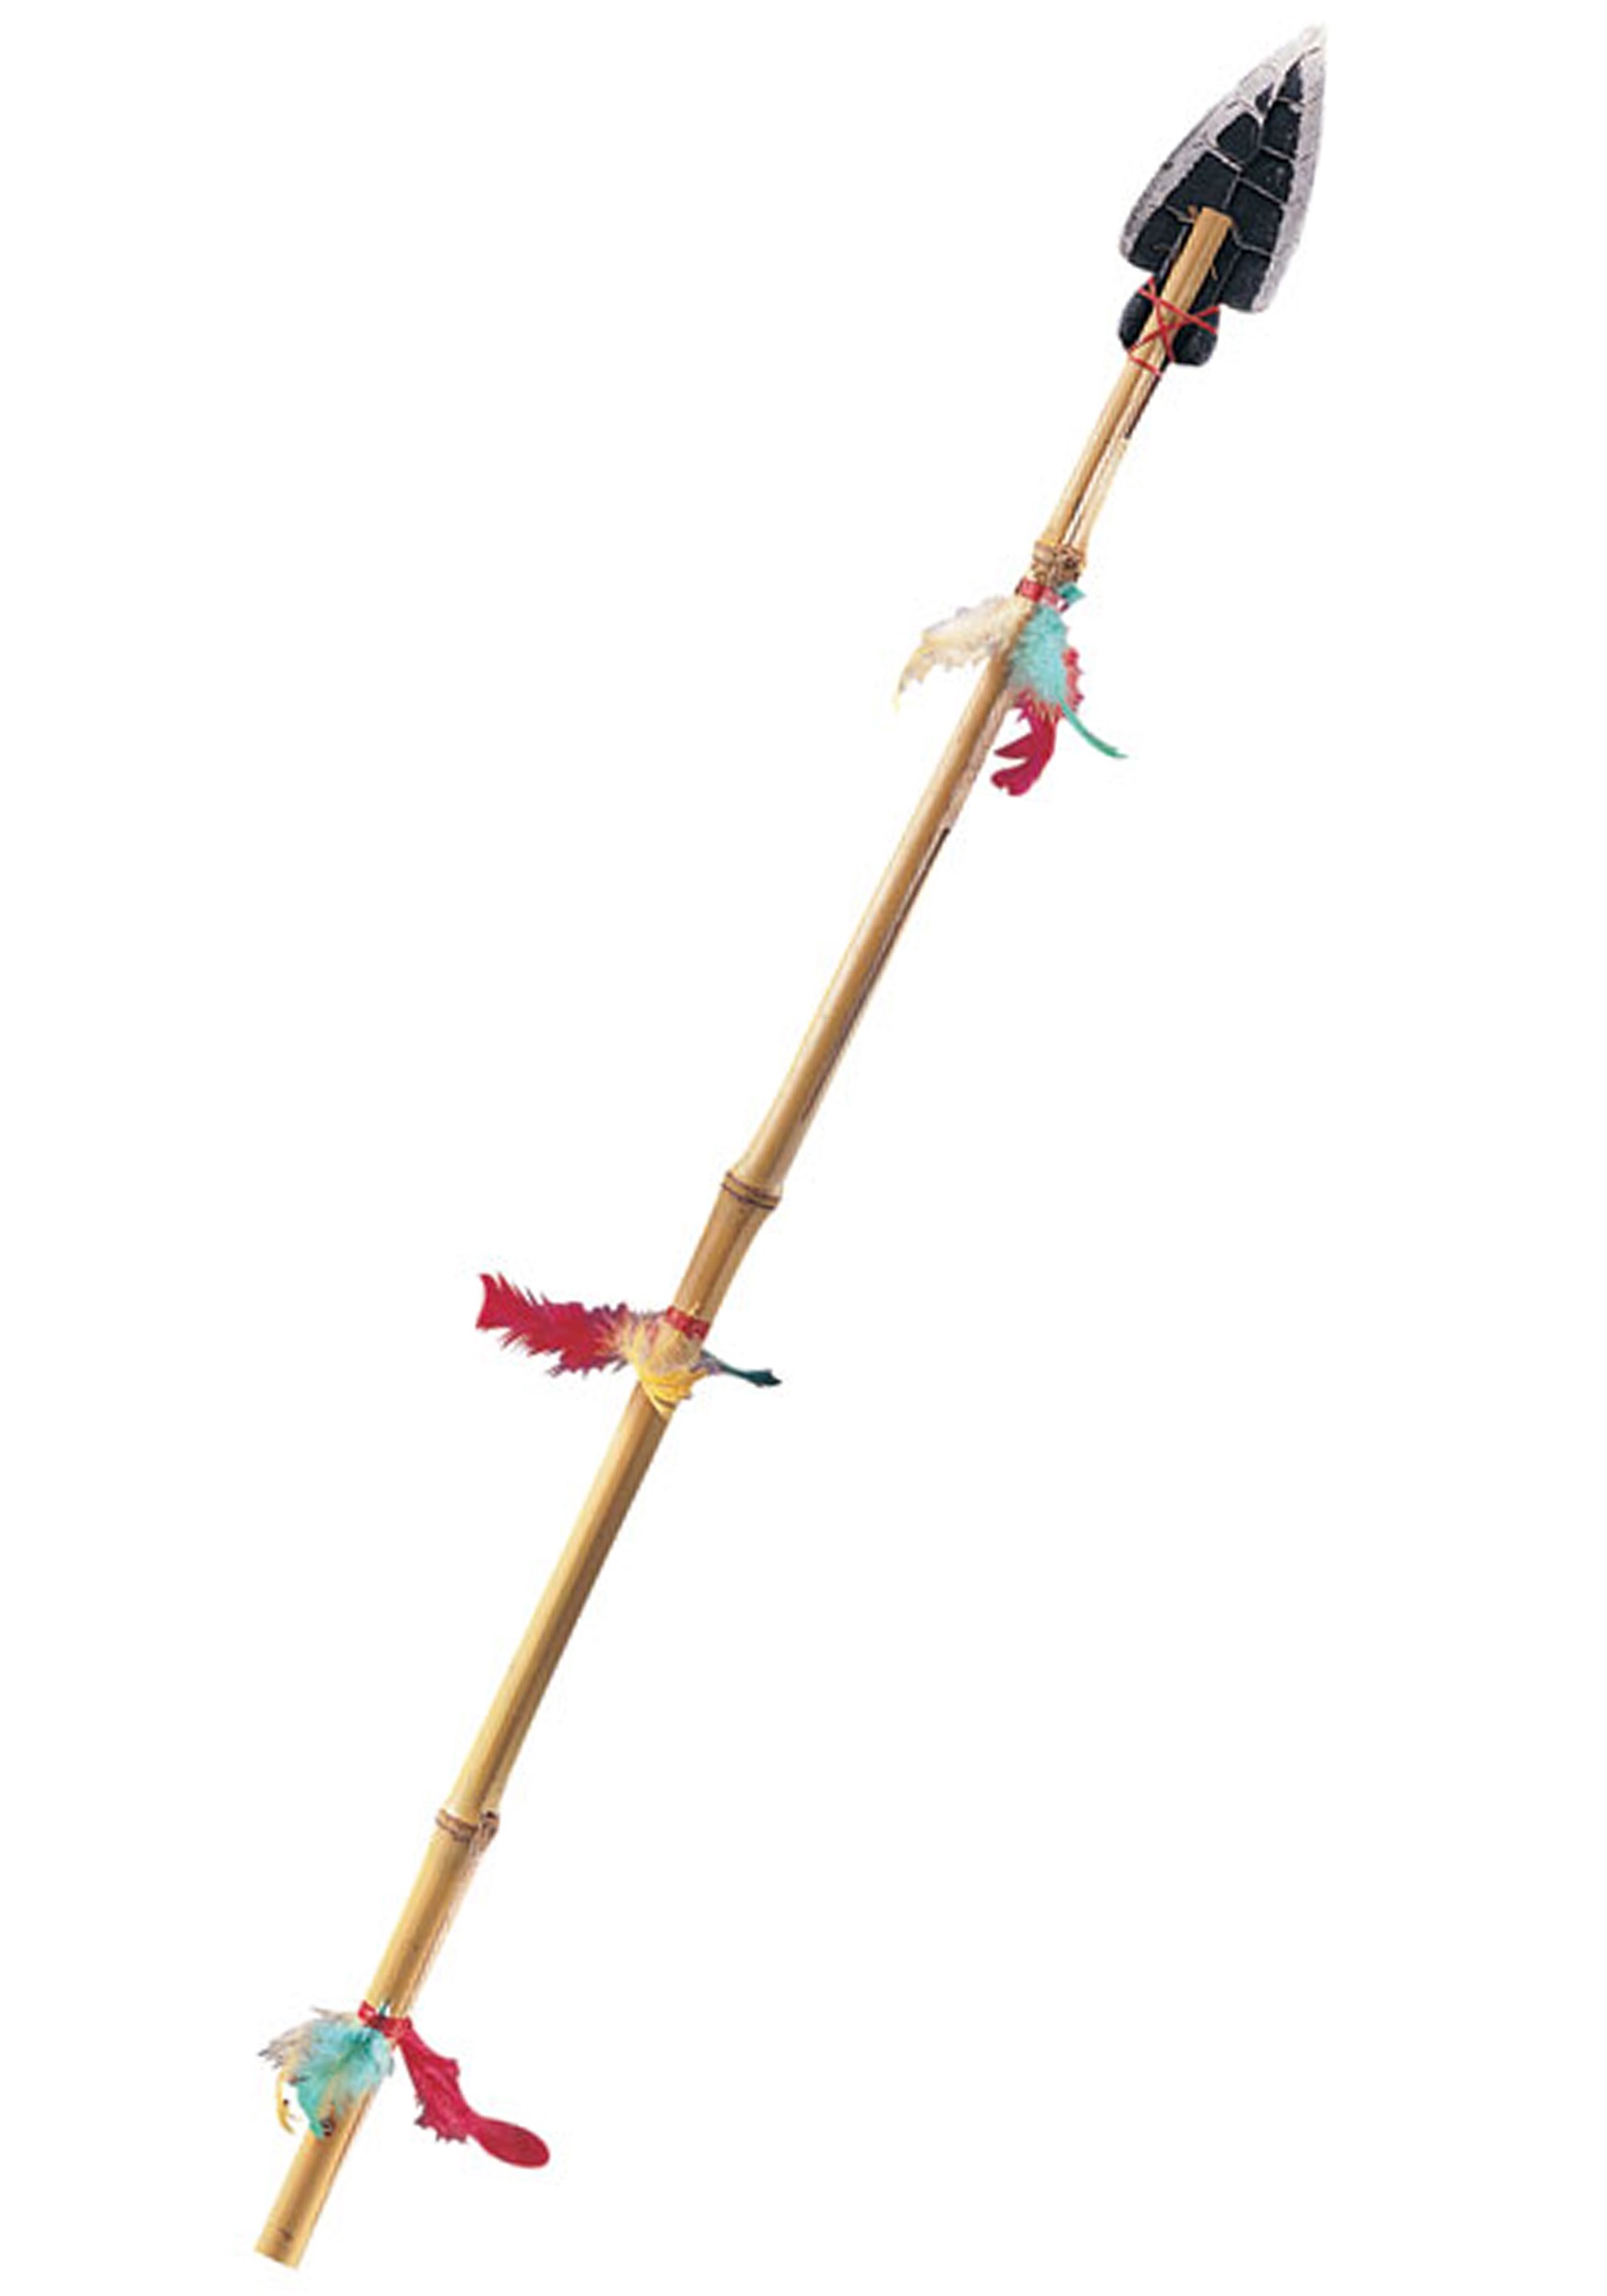 Feathered Wooden Toy Spear